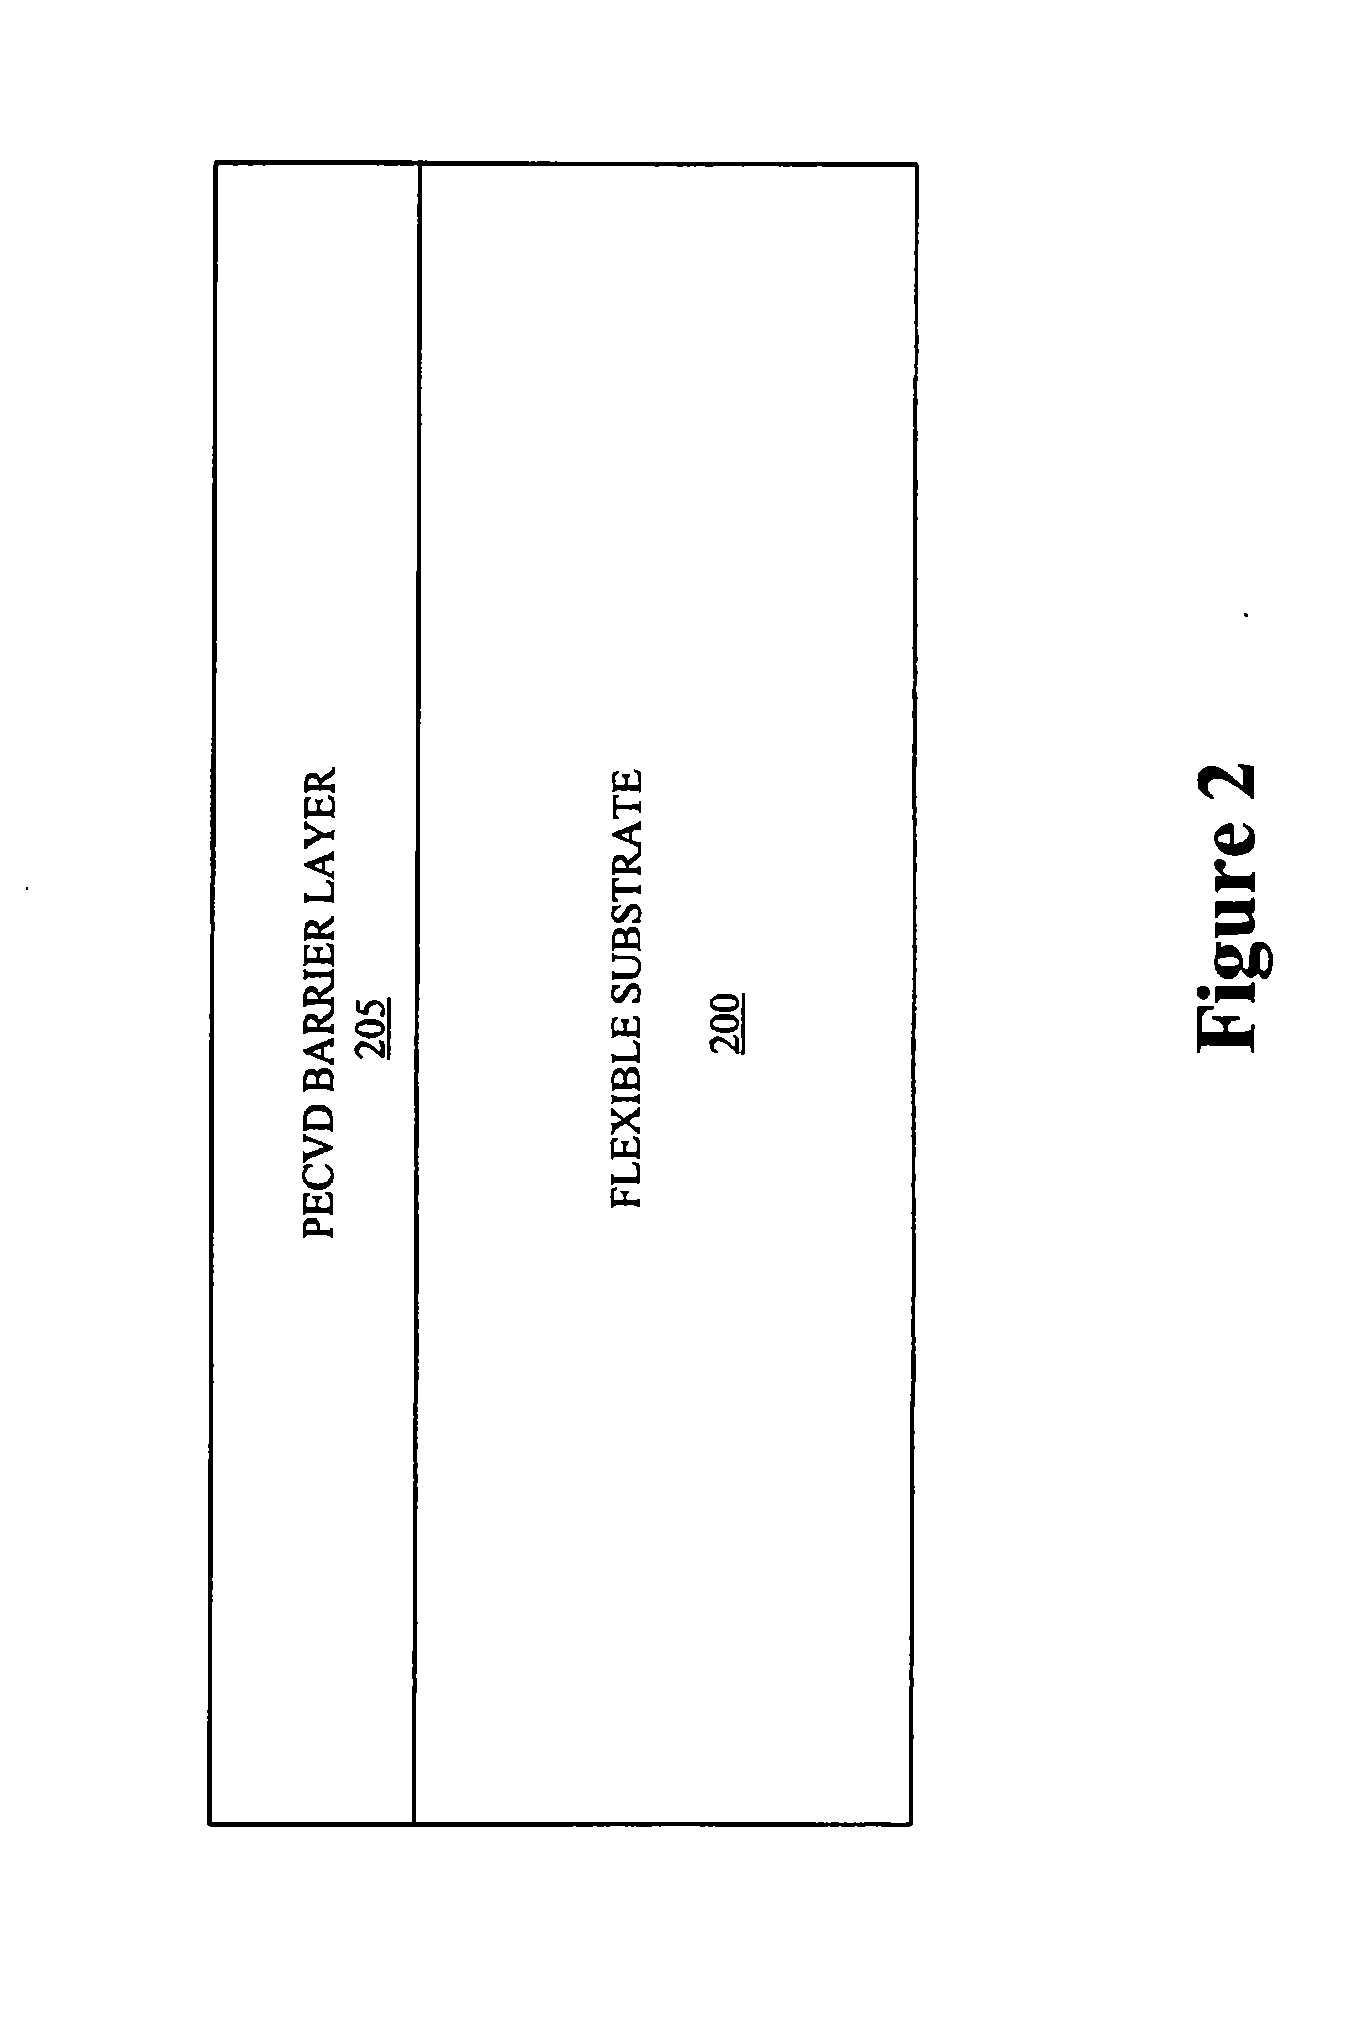 Roll-To-Roll Plasma Enhanced Chemical Vapor Deposition Method of Barrier Layers Comprising Silicon And Carbon